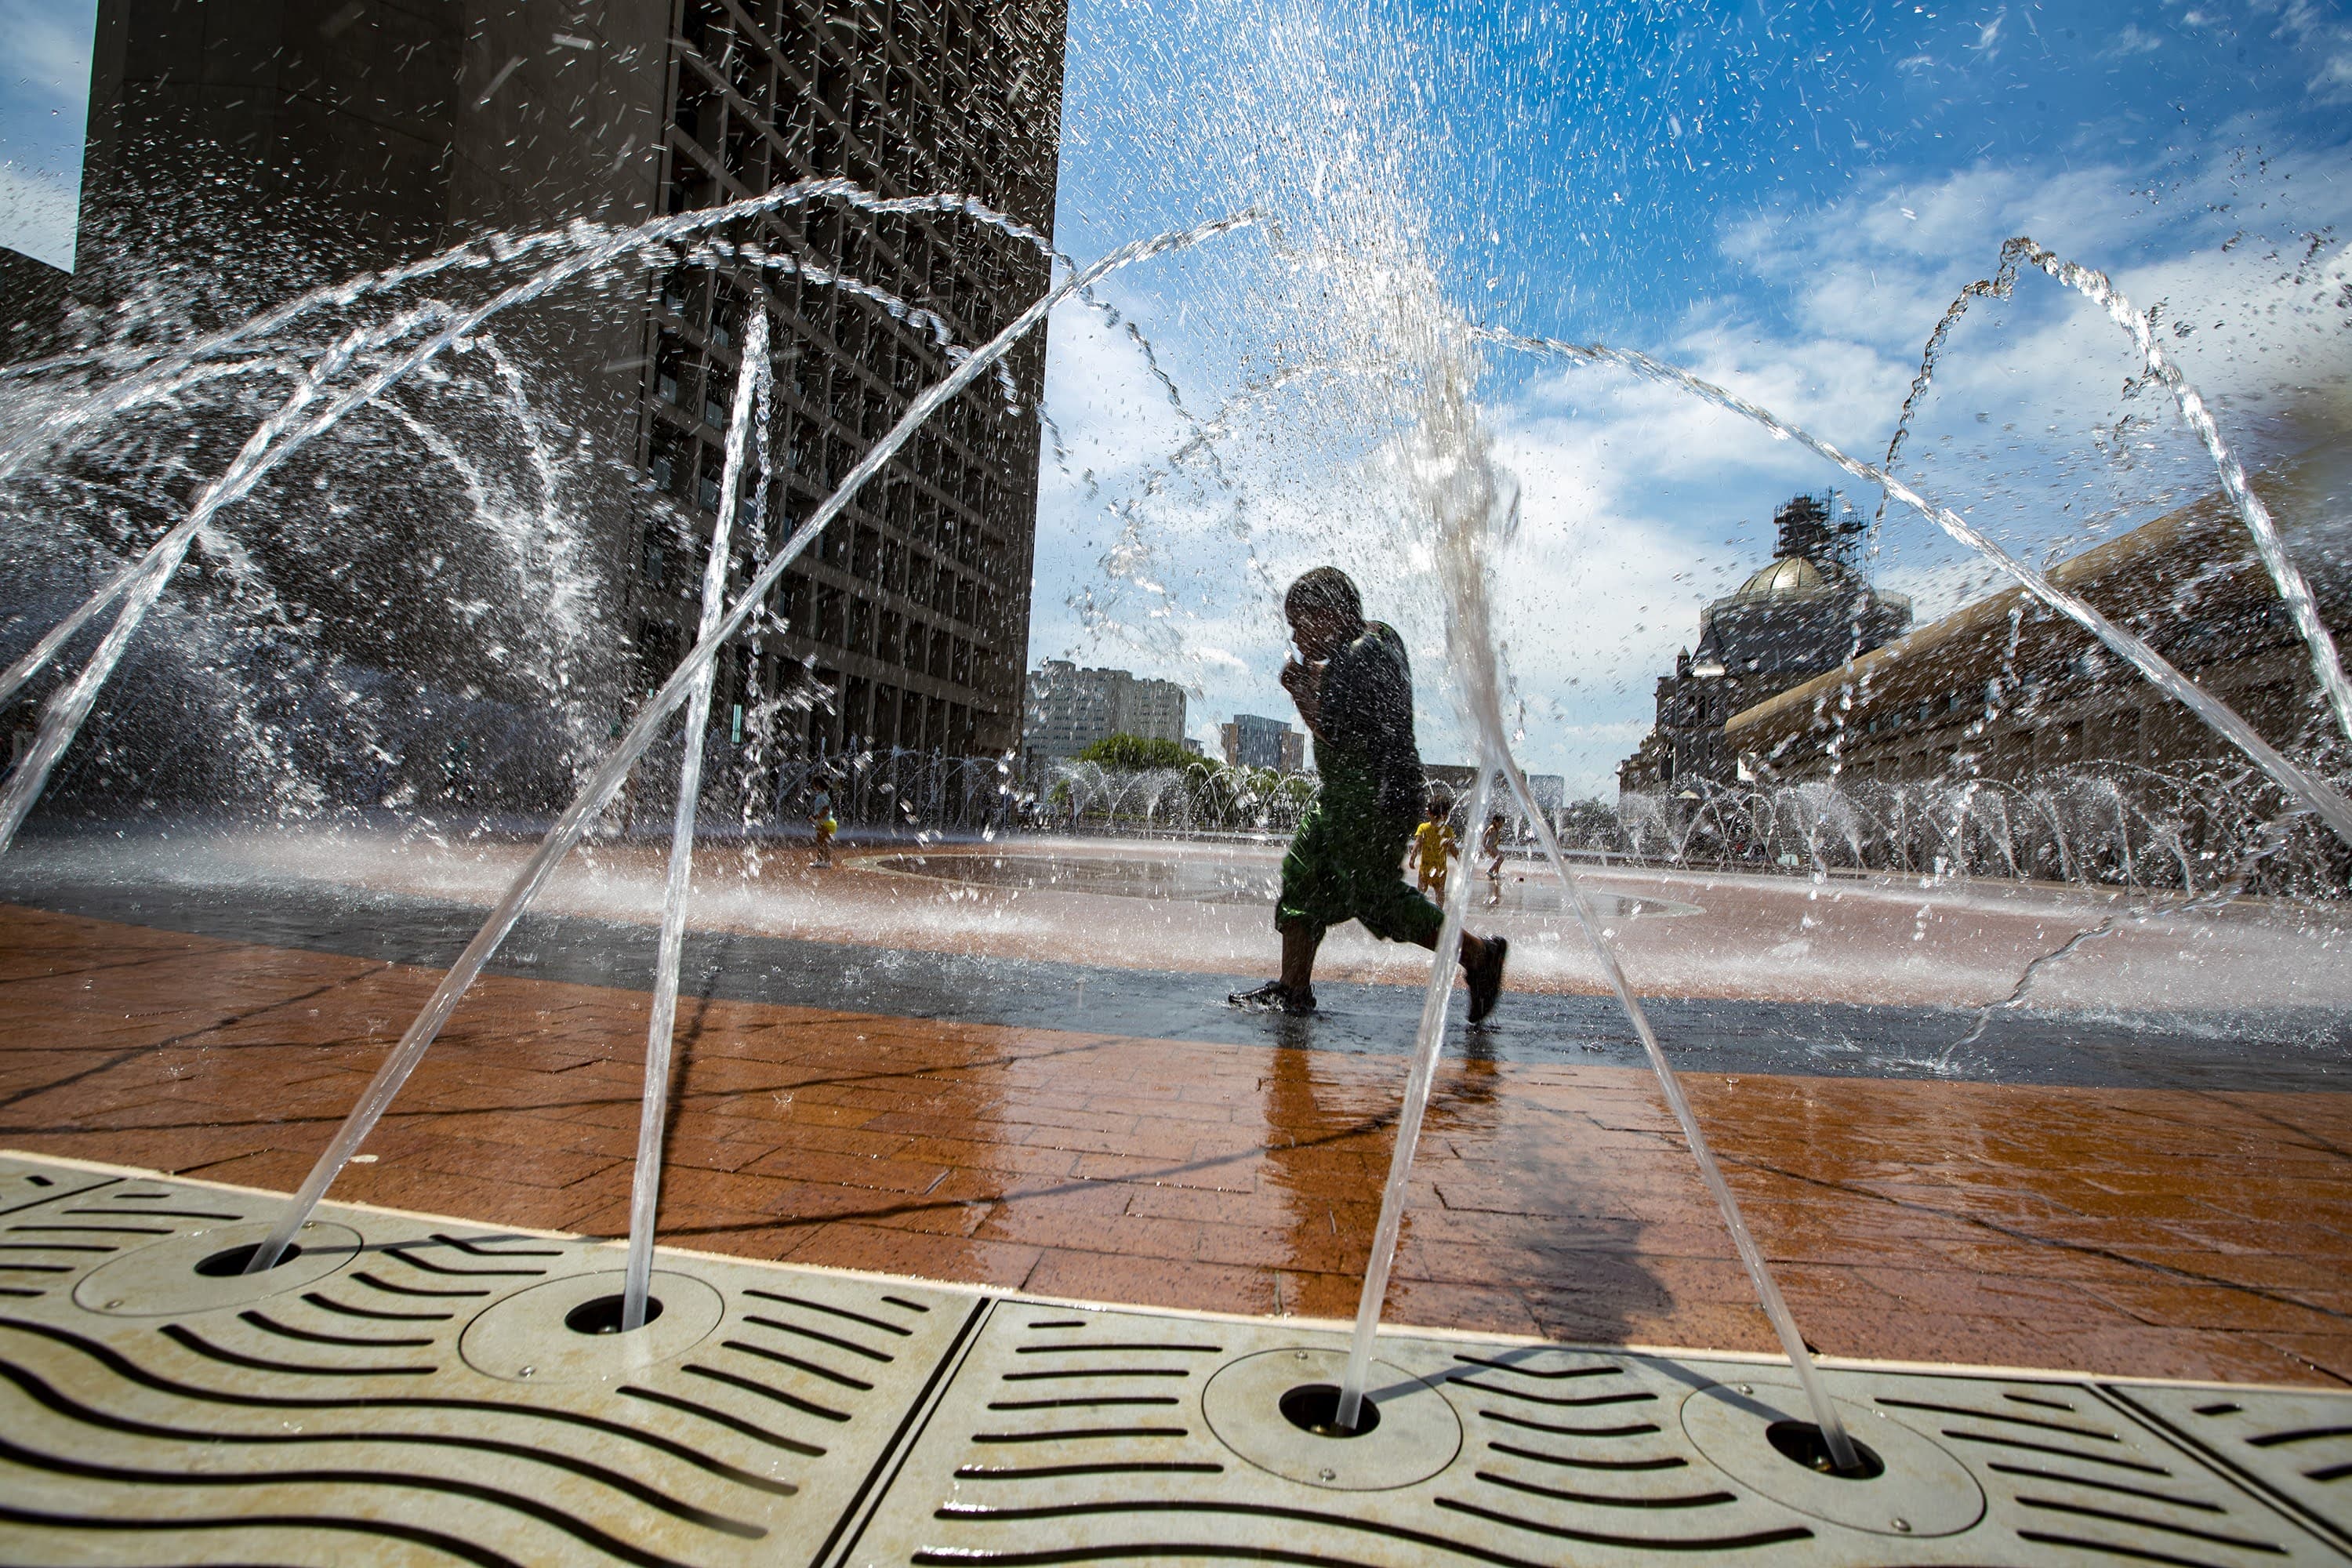 A child runs through the fountain at the Christian Science Plaza in Boston in the summer of 2021. (Jesse Costa/WBUR)